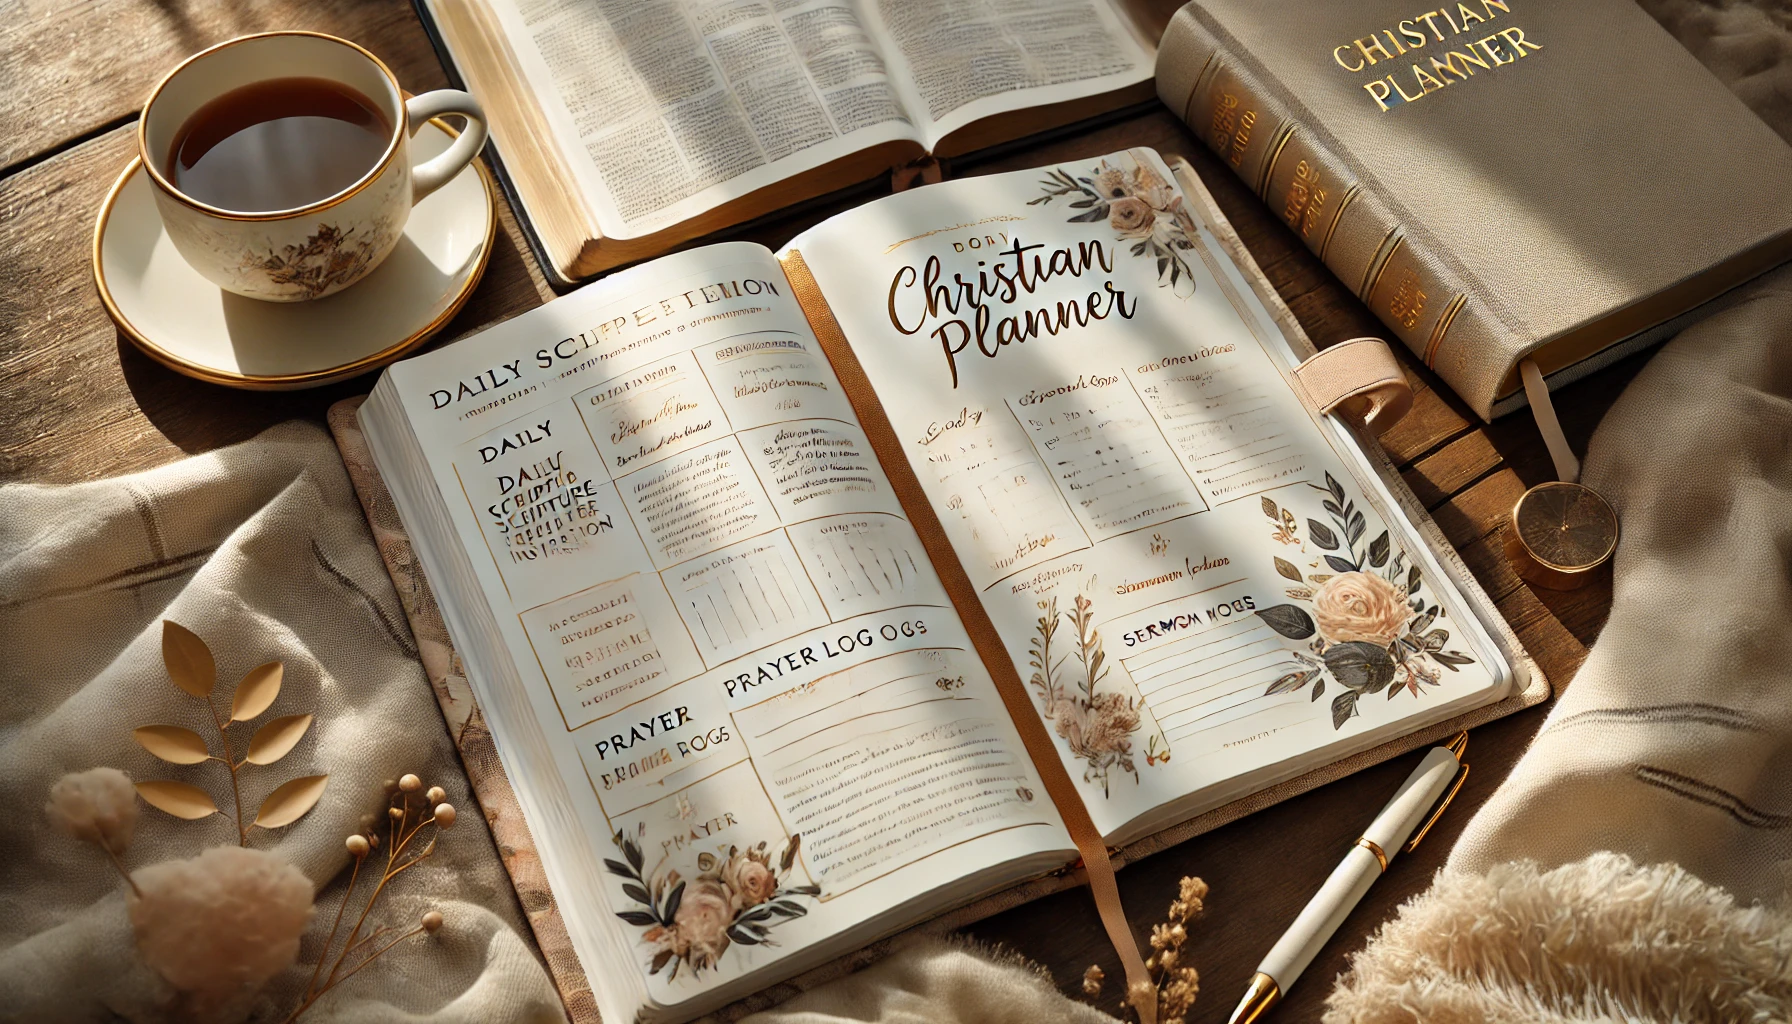 Christian planner - gift ideas for believers